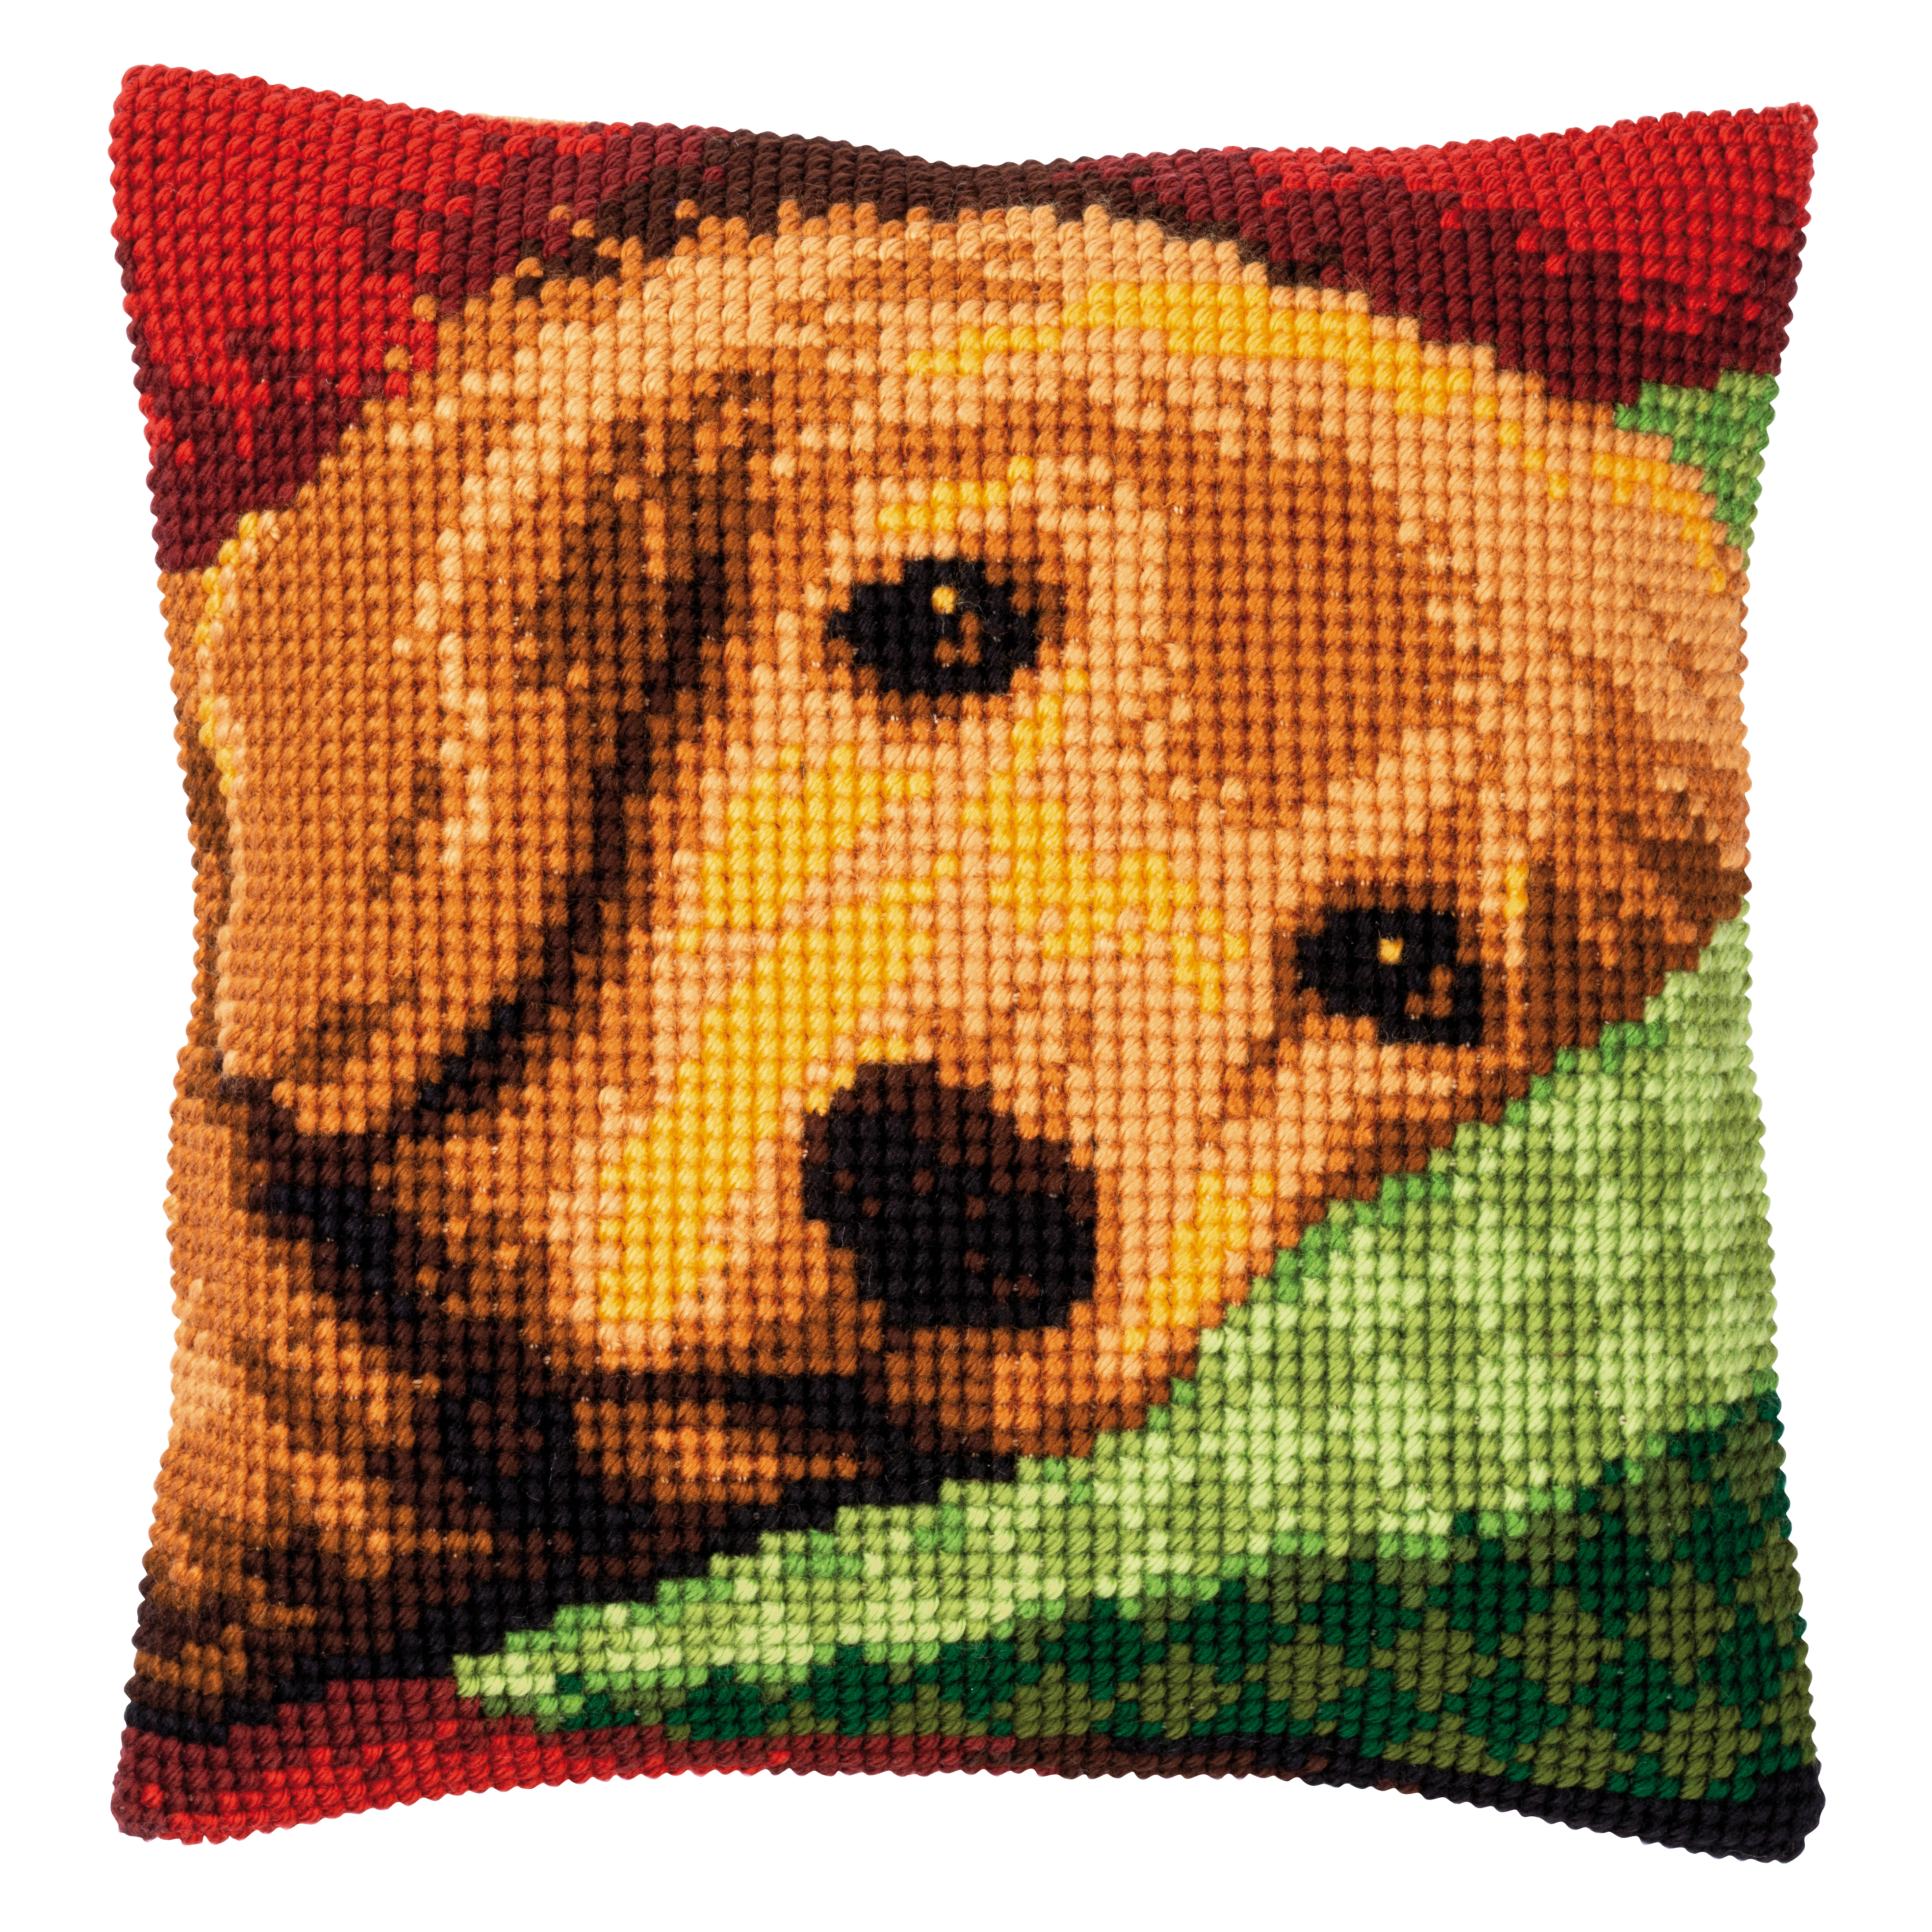 Vervaco Cross Stitch Kit Cushion Sleepy Little Dog - Picture 1 of 1